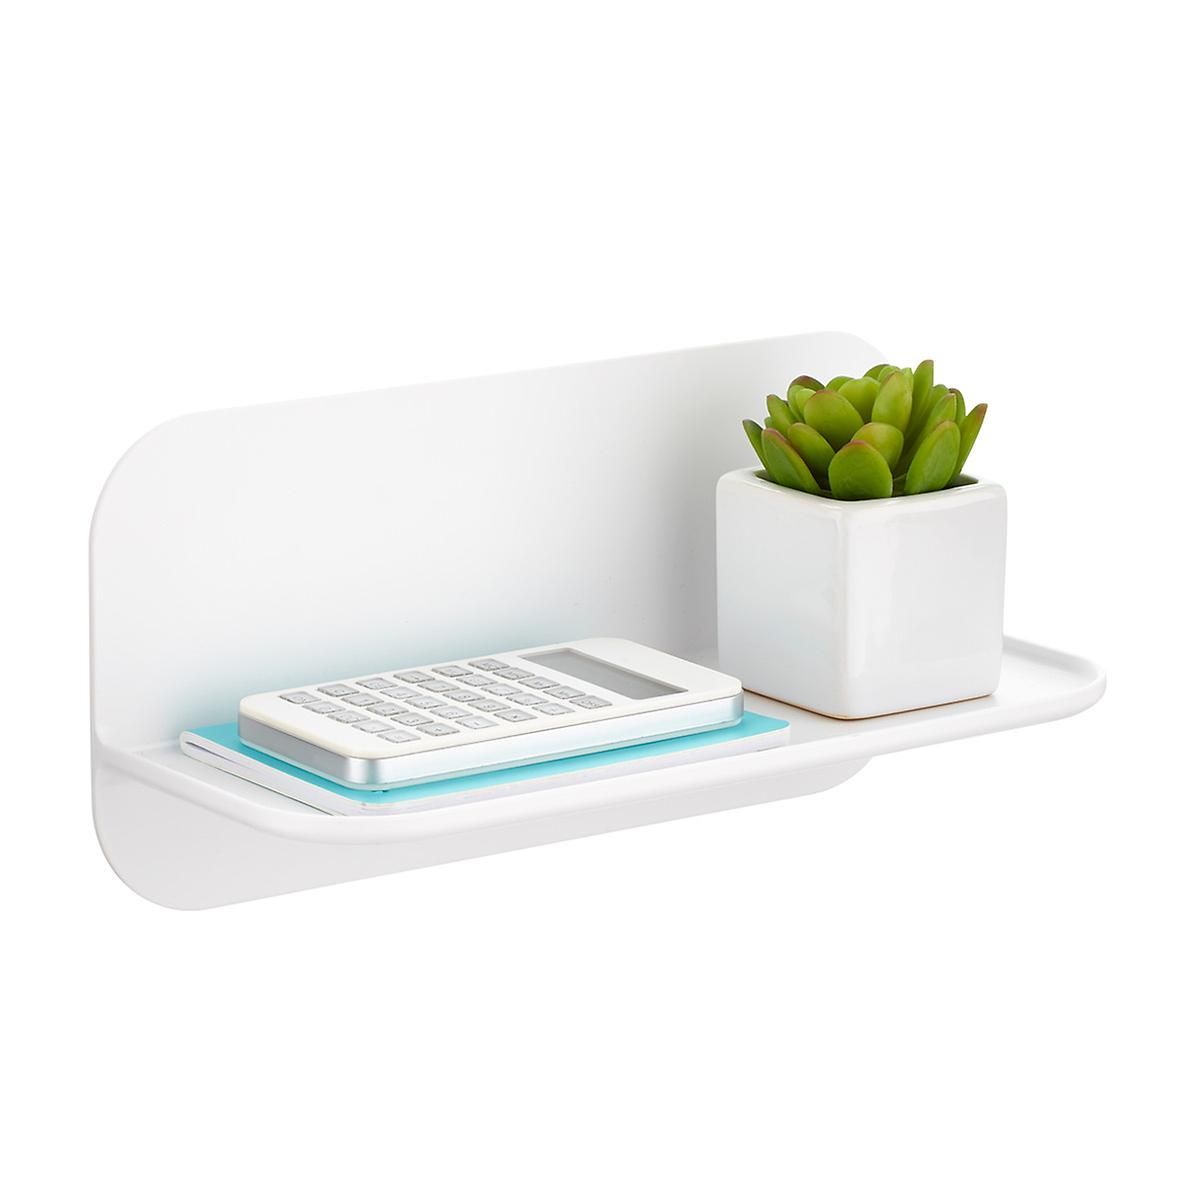 Perch Shelfy | The Container Store